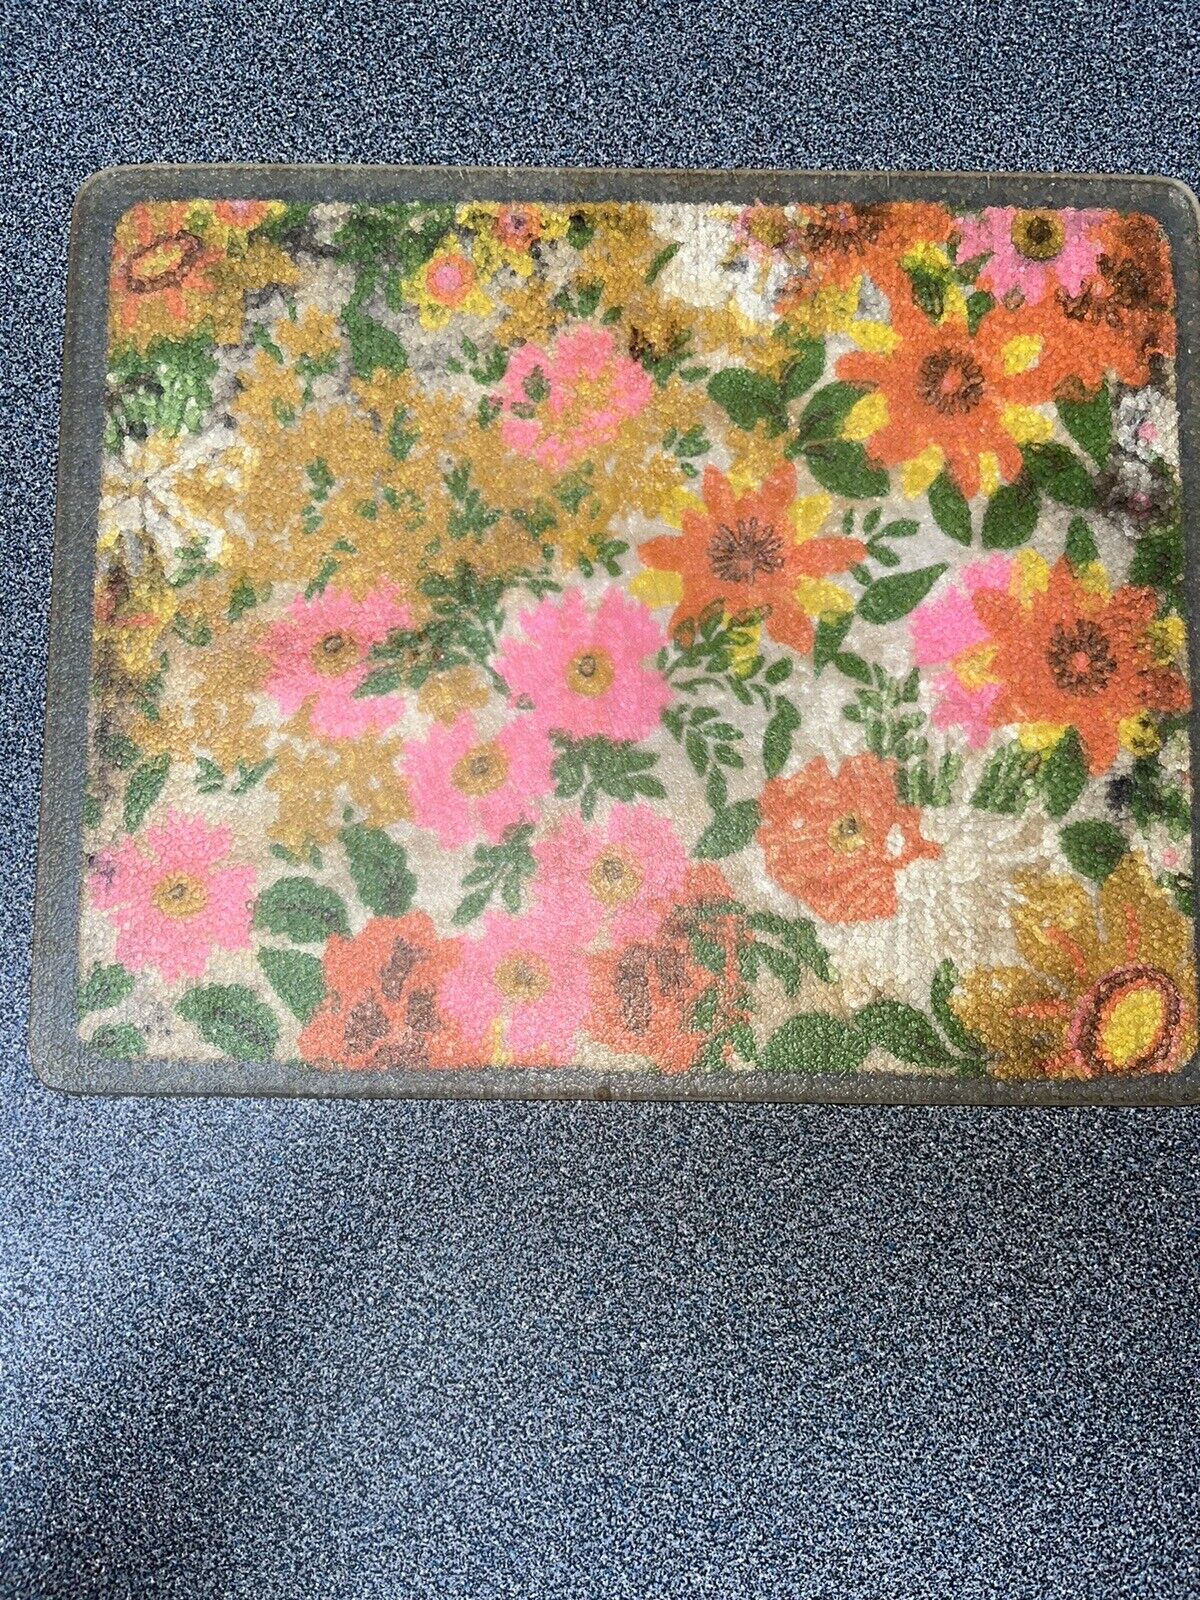 VTG 1960-70s Retro Cutting Board With Textured Surface, 11” x9”, & Cork Backing